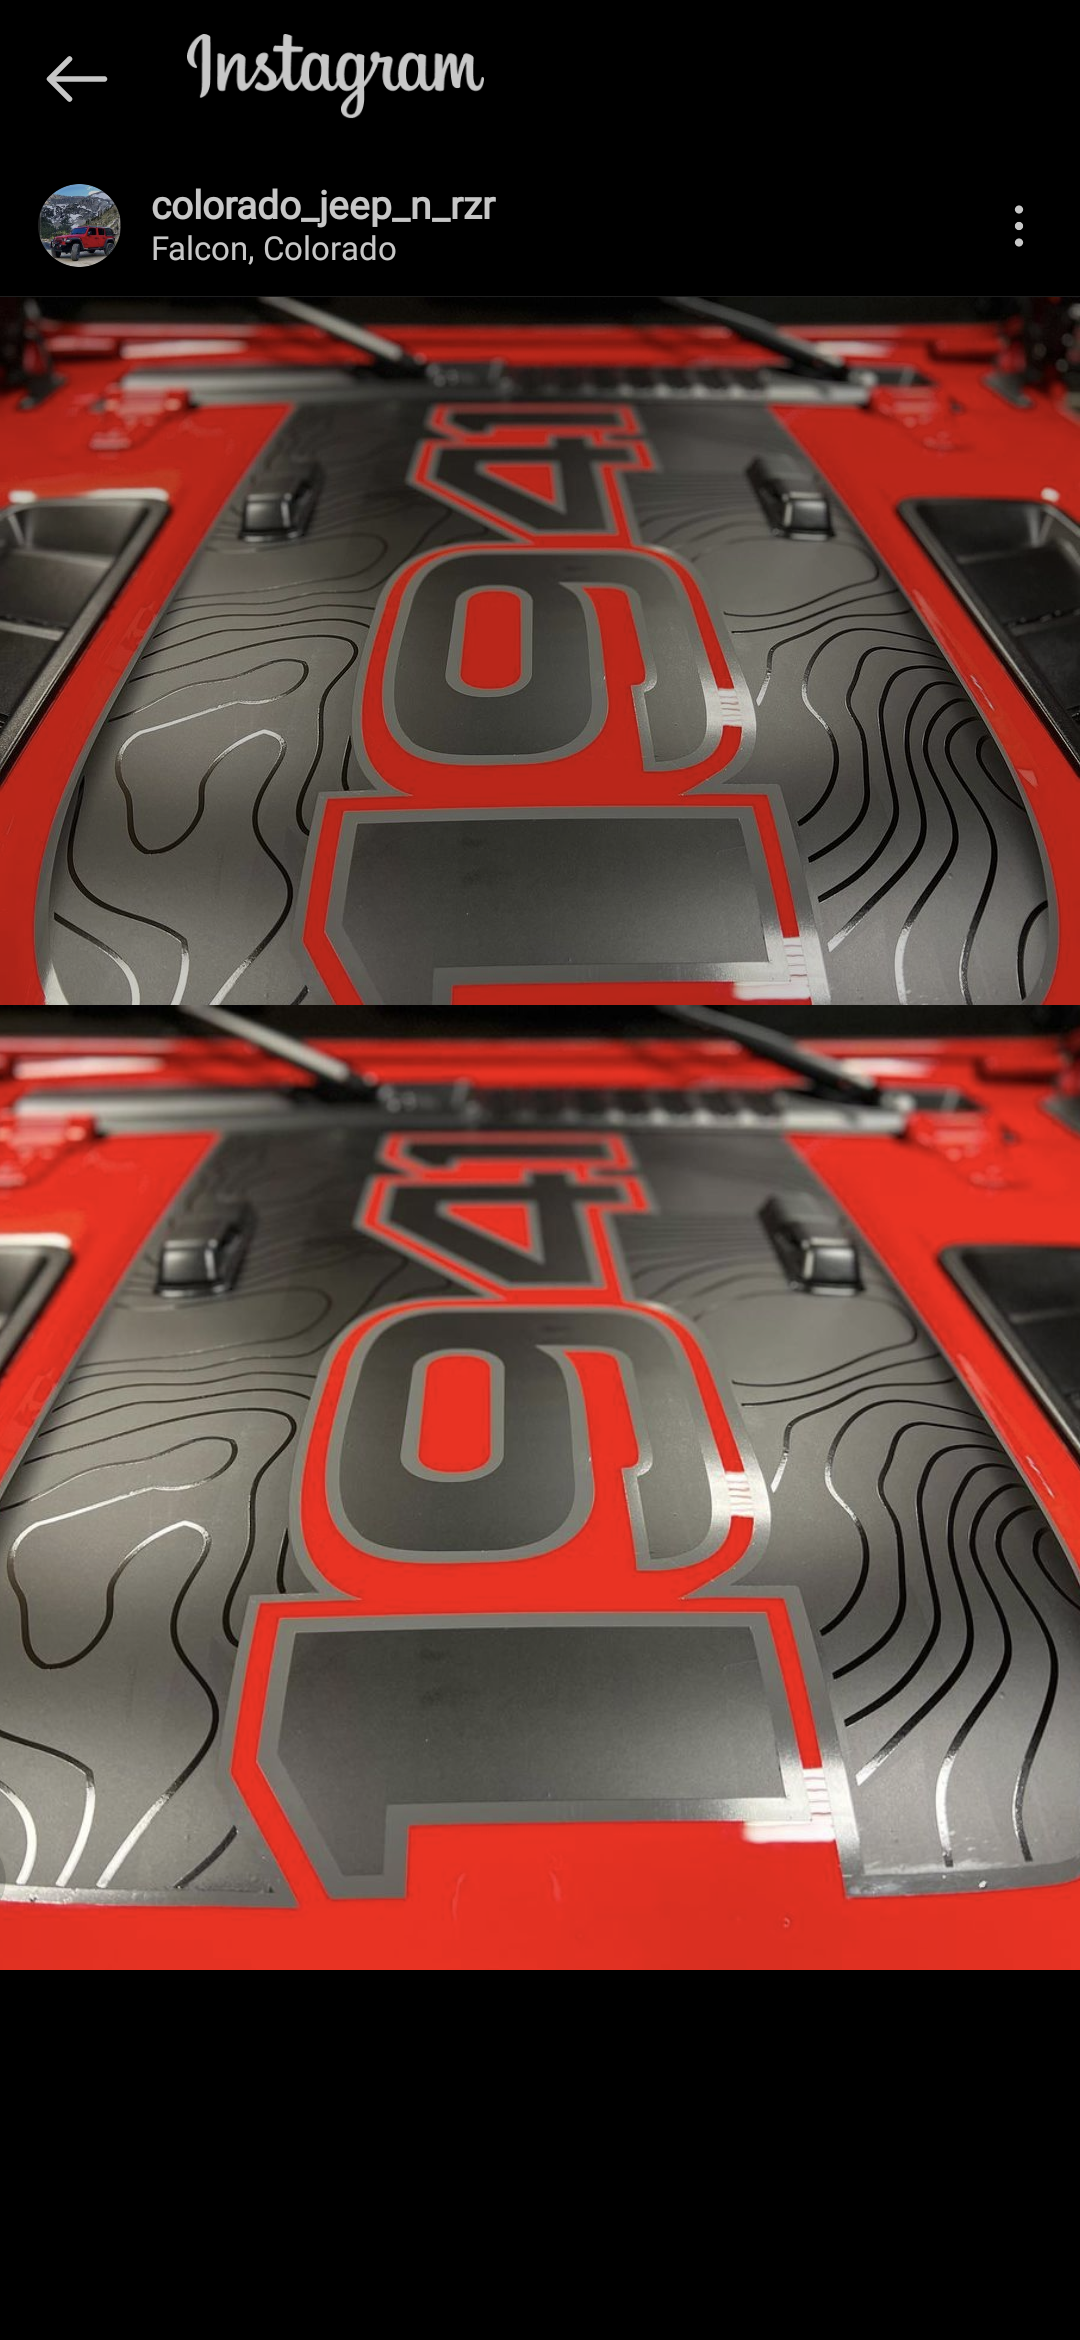 Open 1941 Topographical Red Line Rubicon Blackout Hood Decal- Fits Jeep Wrangler & Gladiator JL Hood Decal (3 Pieces)